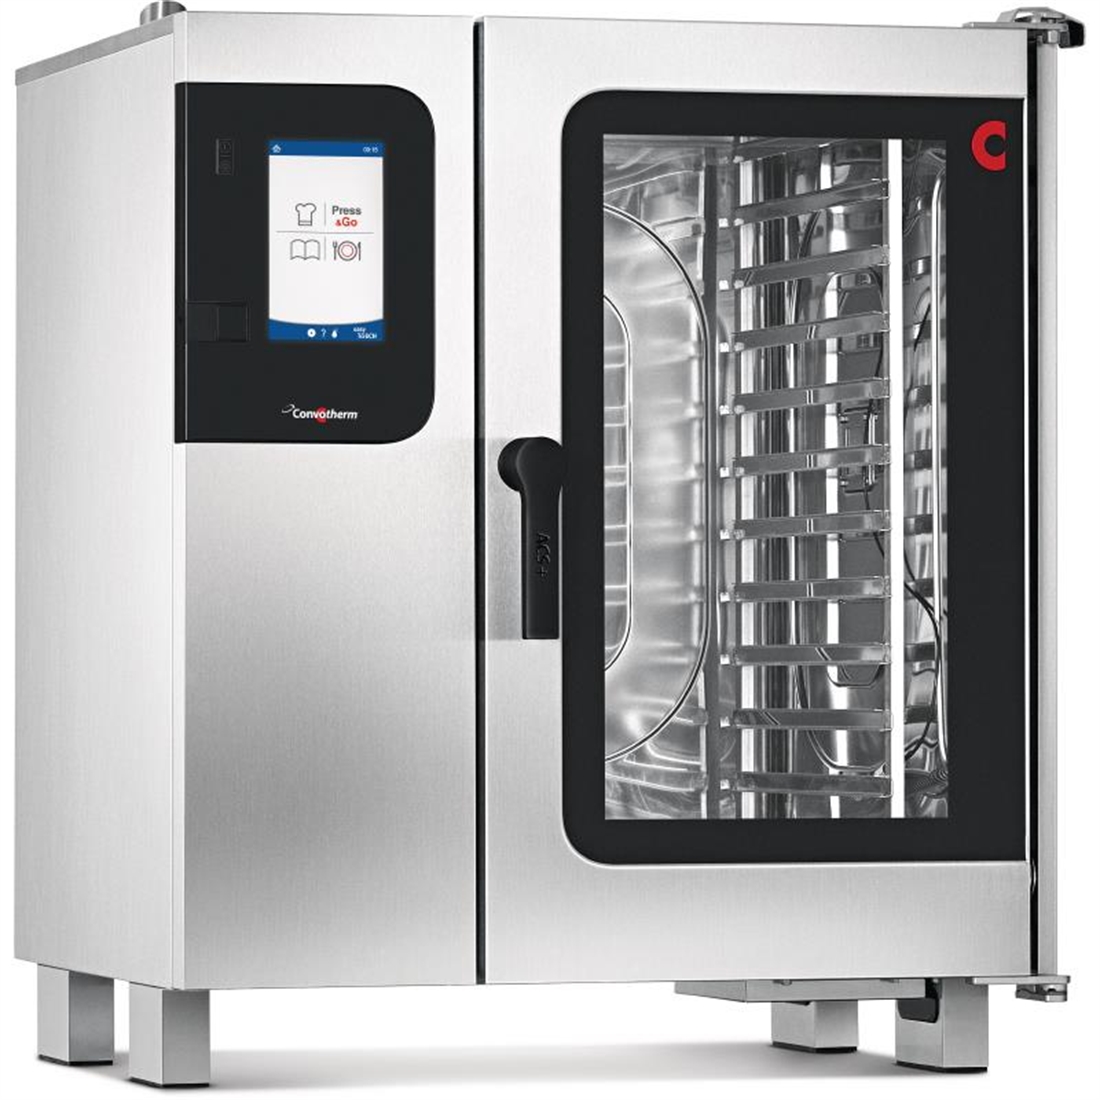 Convotherm 4 easyTouch Combi Oven 10 x 1 x1 GN Grid with Smoker and Grill